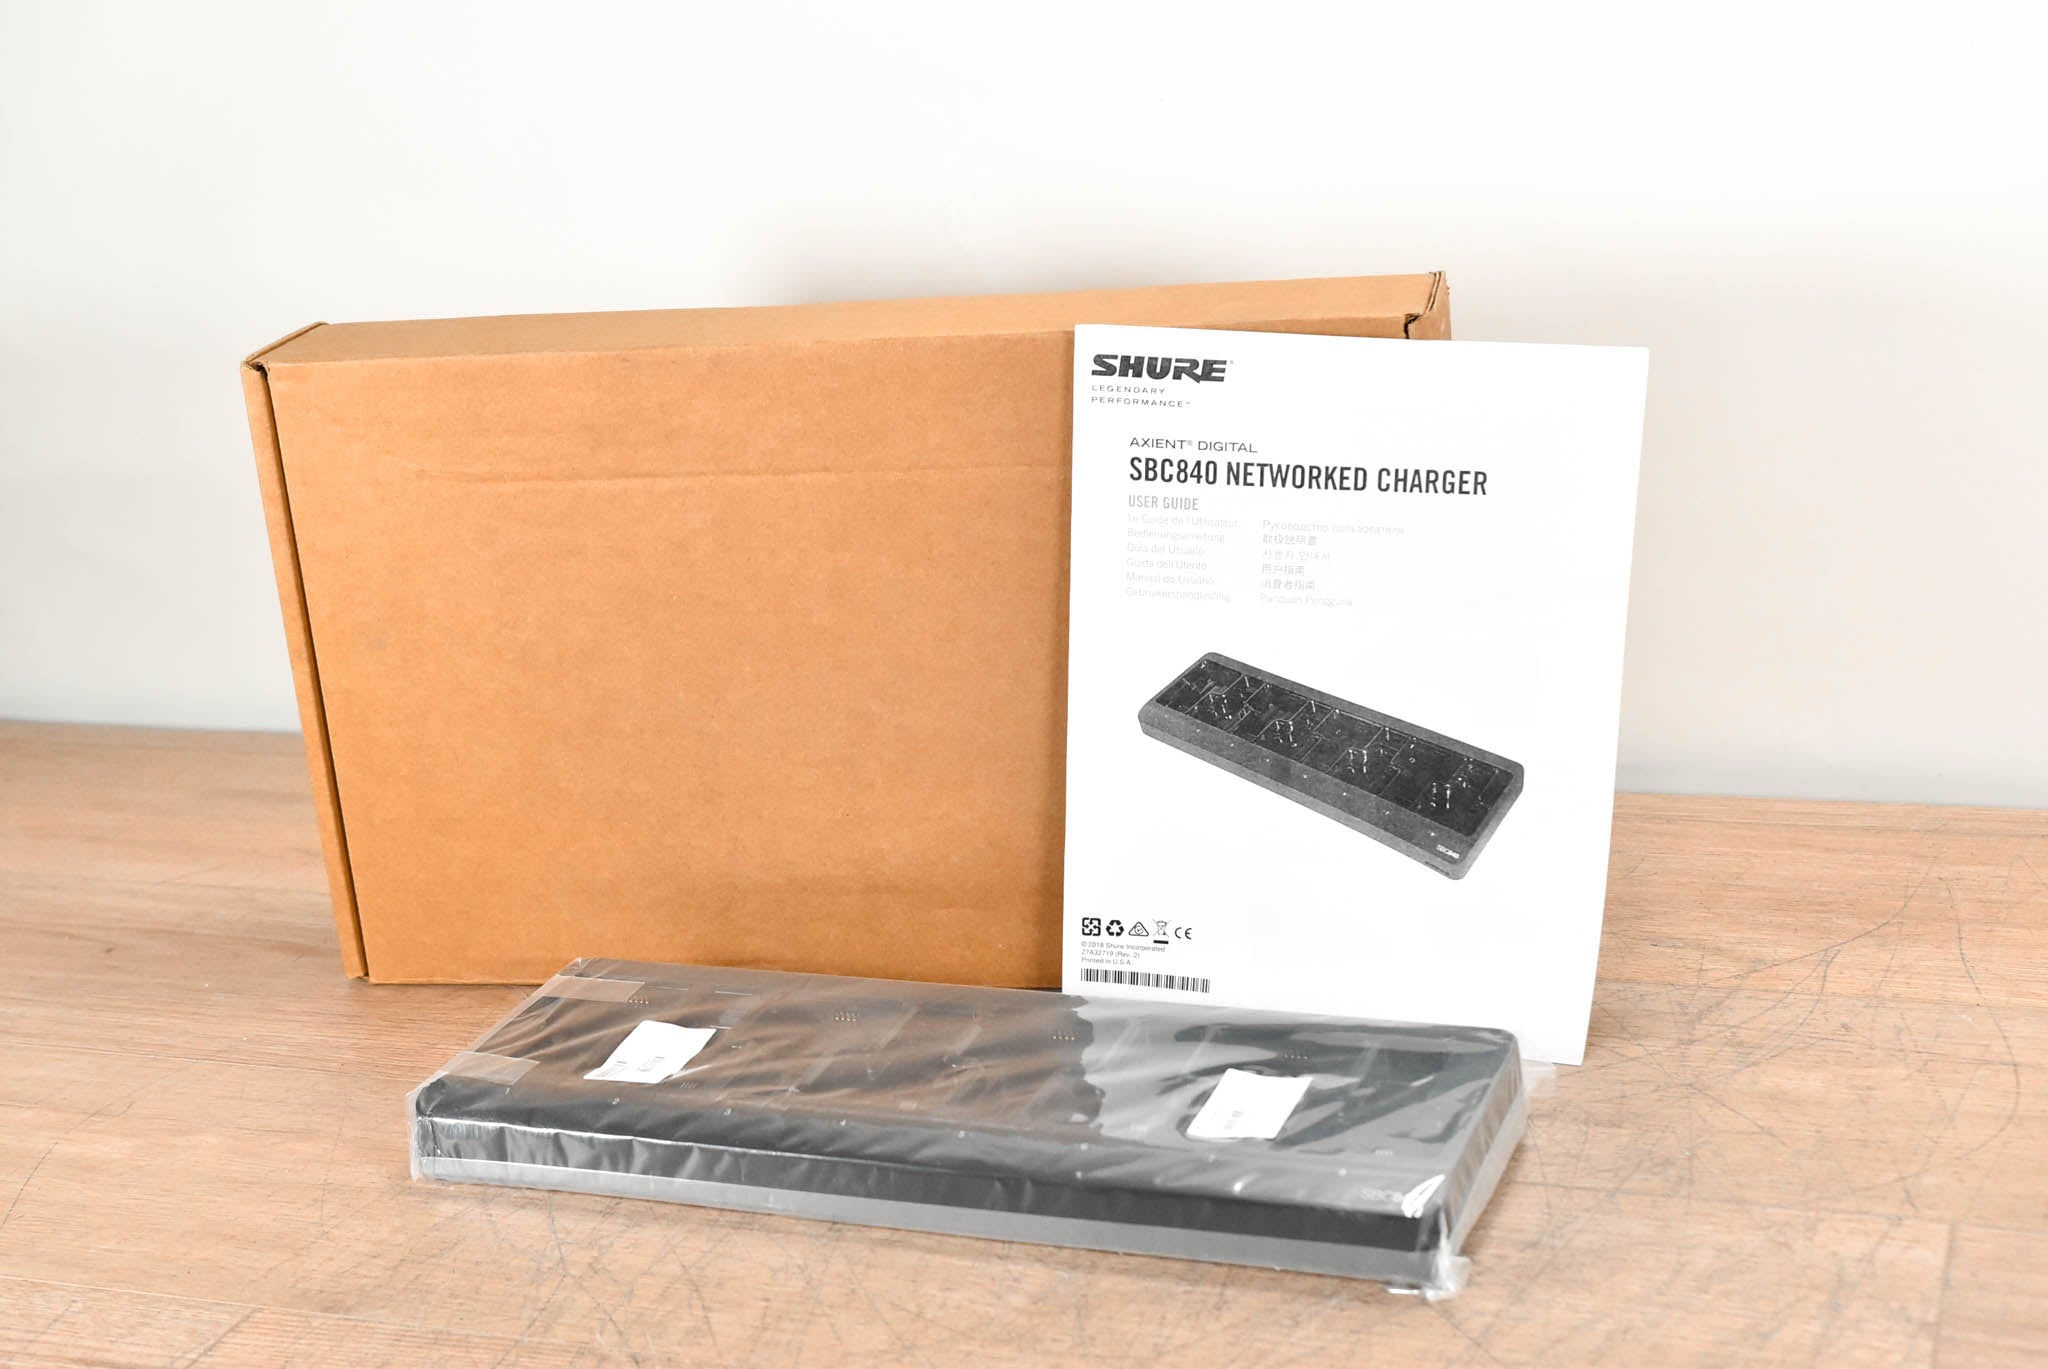 Shure SBC840 Eight-Bay Networked Charger for SB910 or SB920A Batteries